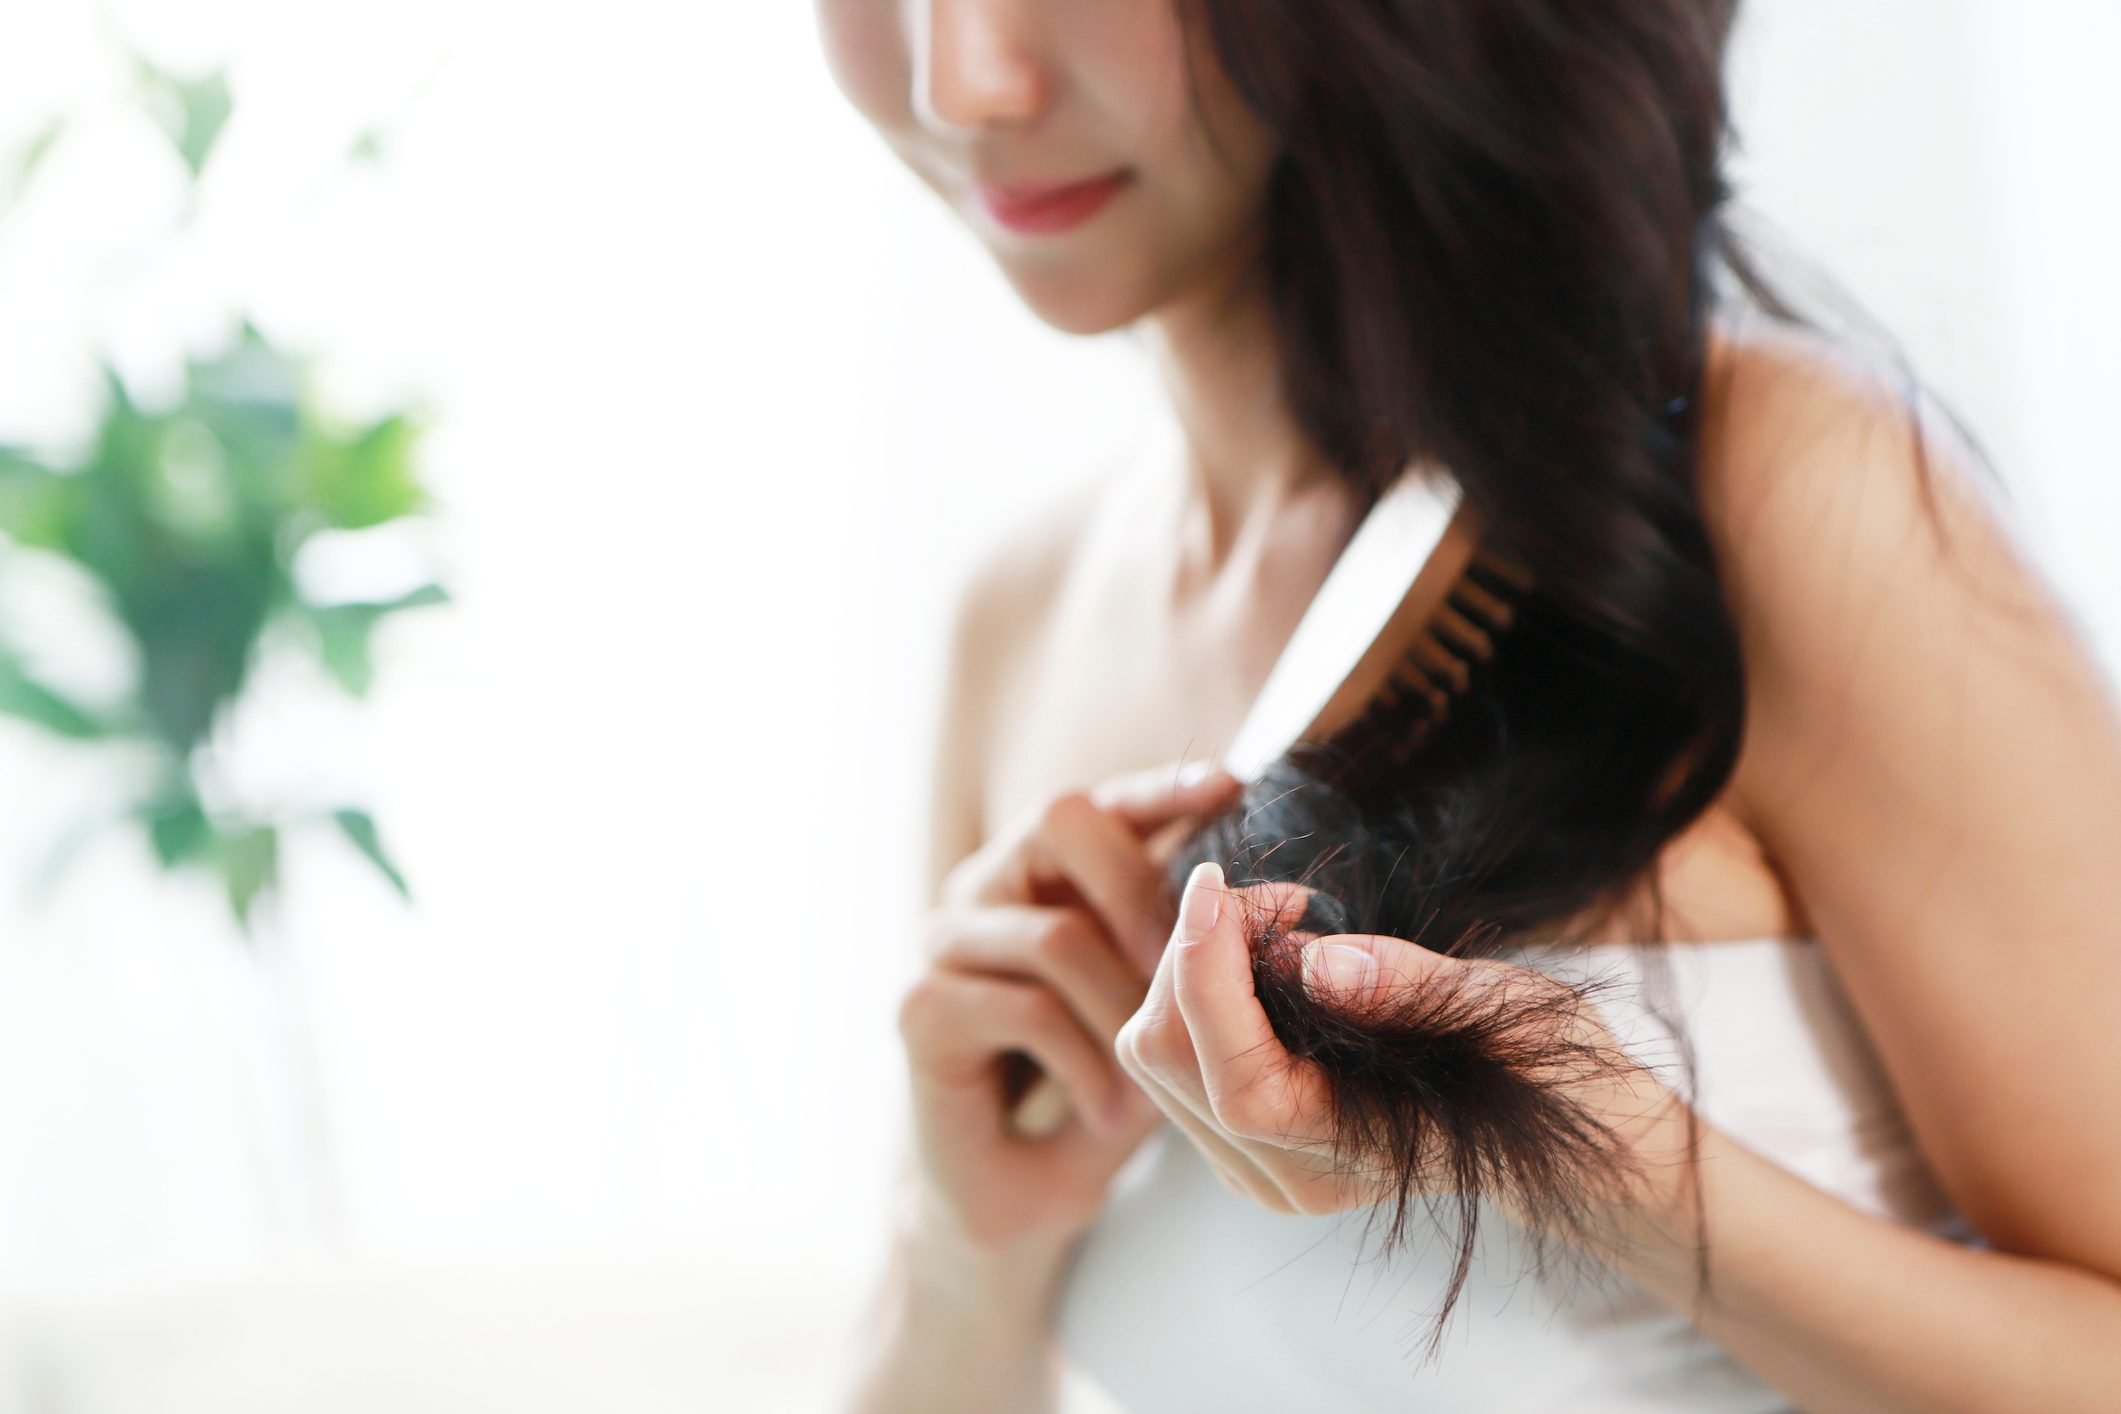 The 12 Absolute Worst Things You Can Do to Your Hair